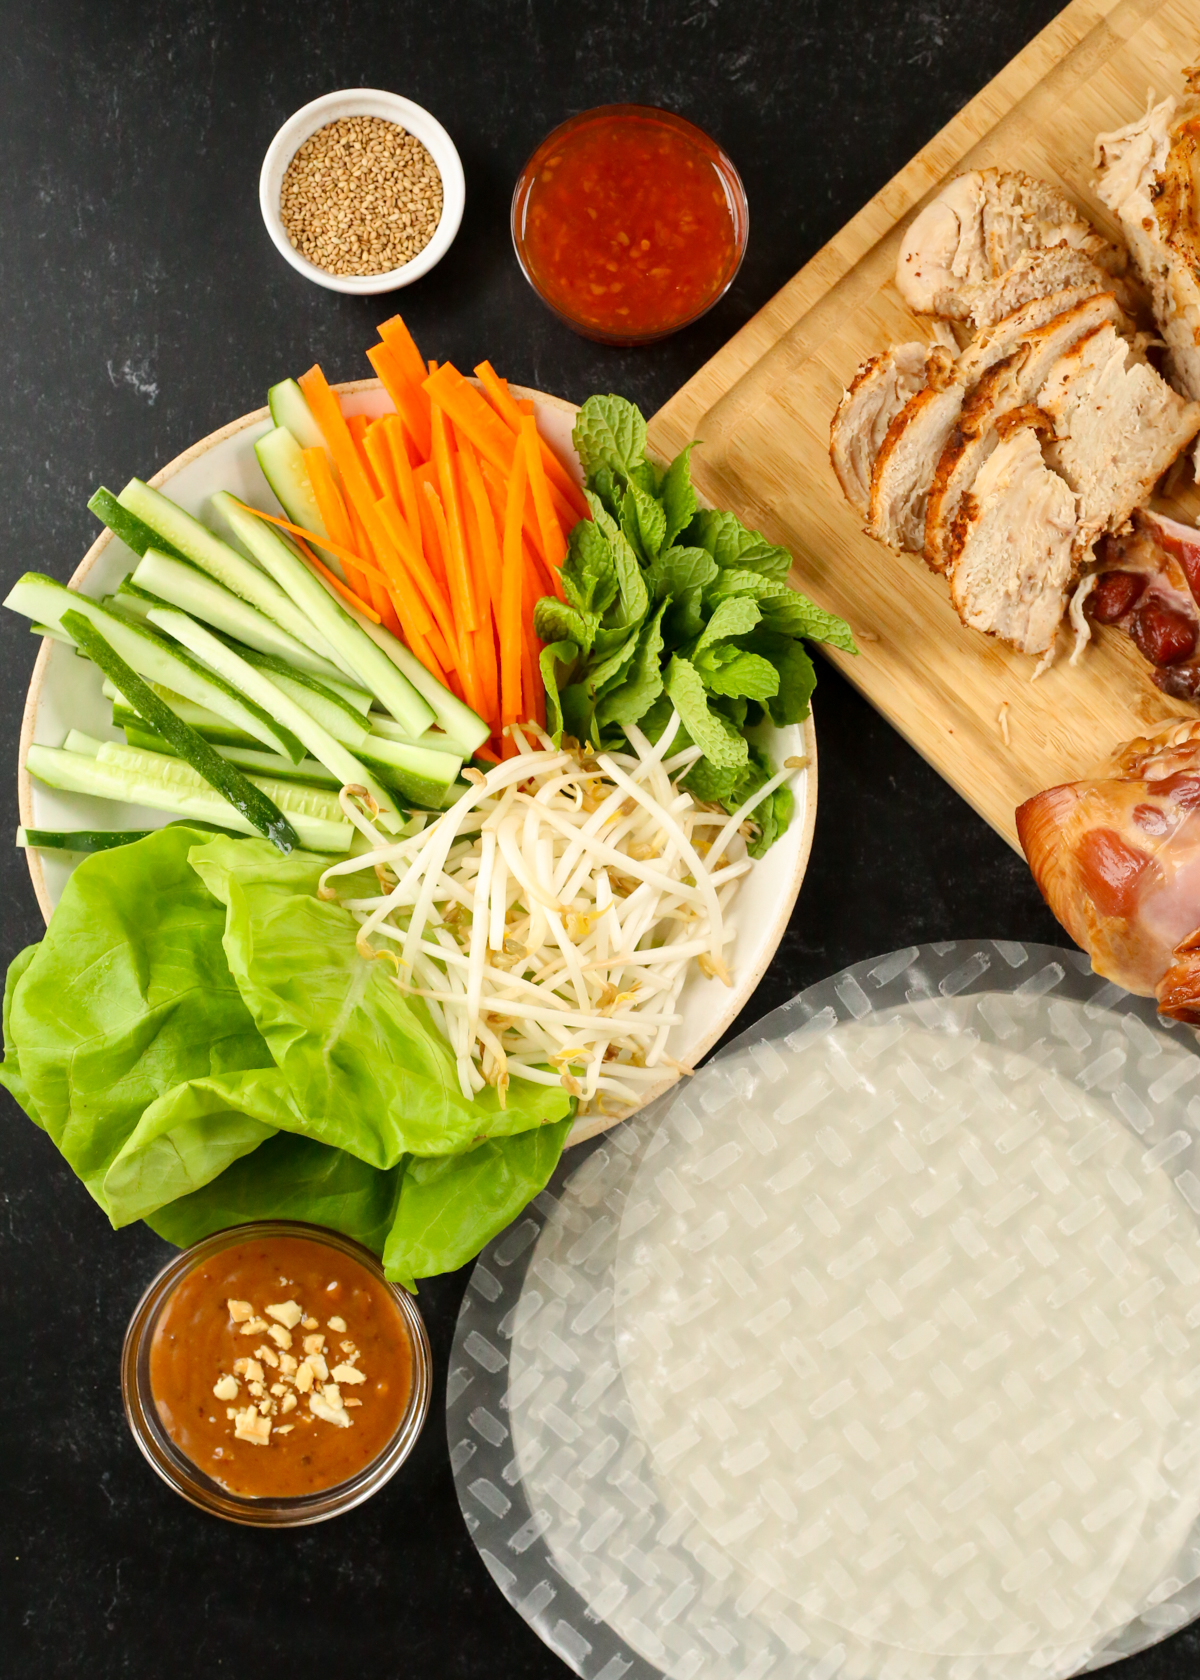 Overhead view of the ingredients needed to make a Leftover Turkey Spring Roll recipe, including a carving board with turkey, a plate full of thinly sliced carrots and cucumbers, lettuce leaves, bean sprouts, and mint leaves, round transparent rice paper wrappers stacked in the lower corner, and small prep bowls and ramekins with dipping sauces and toasted sesame seeds